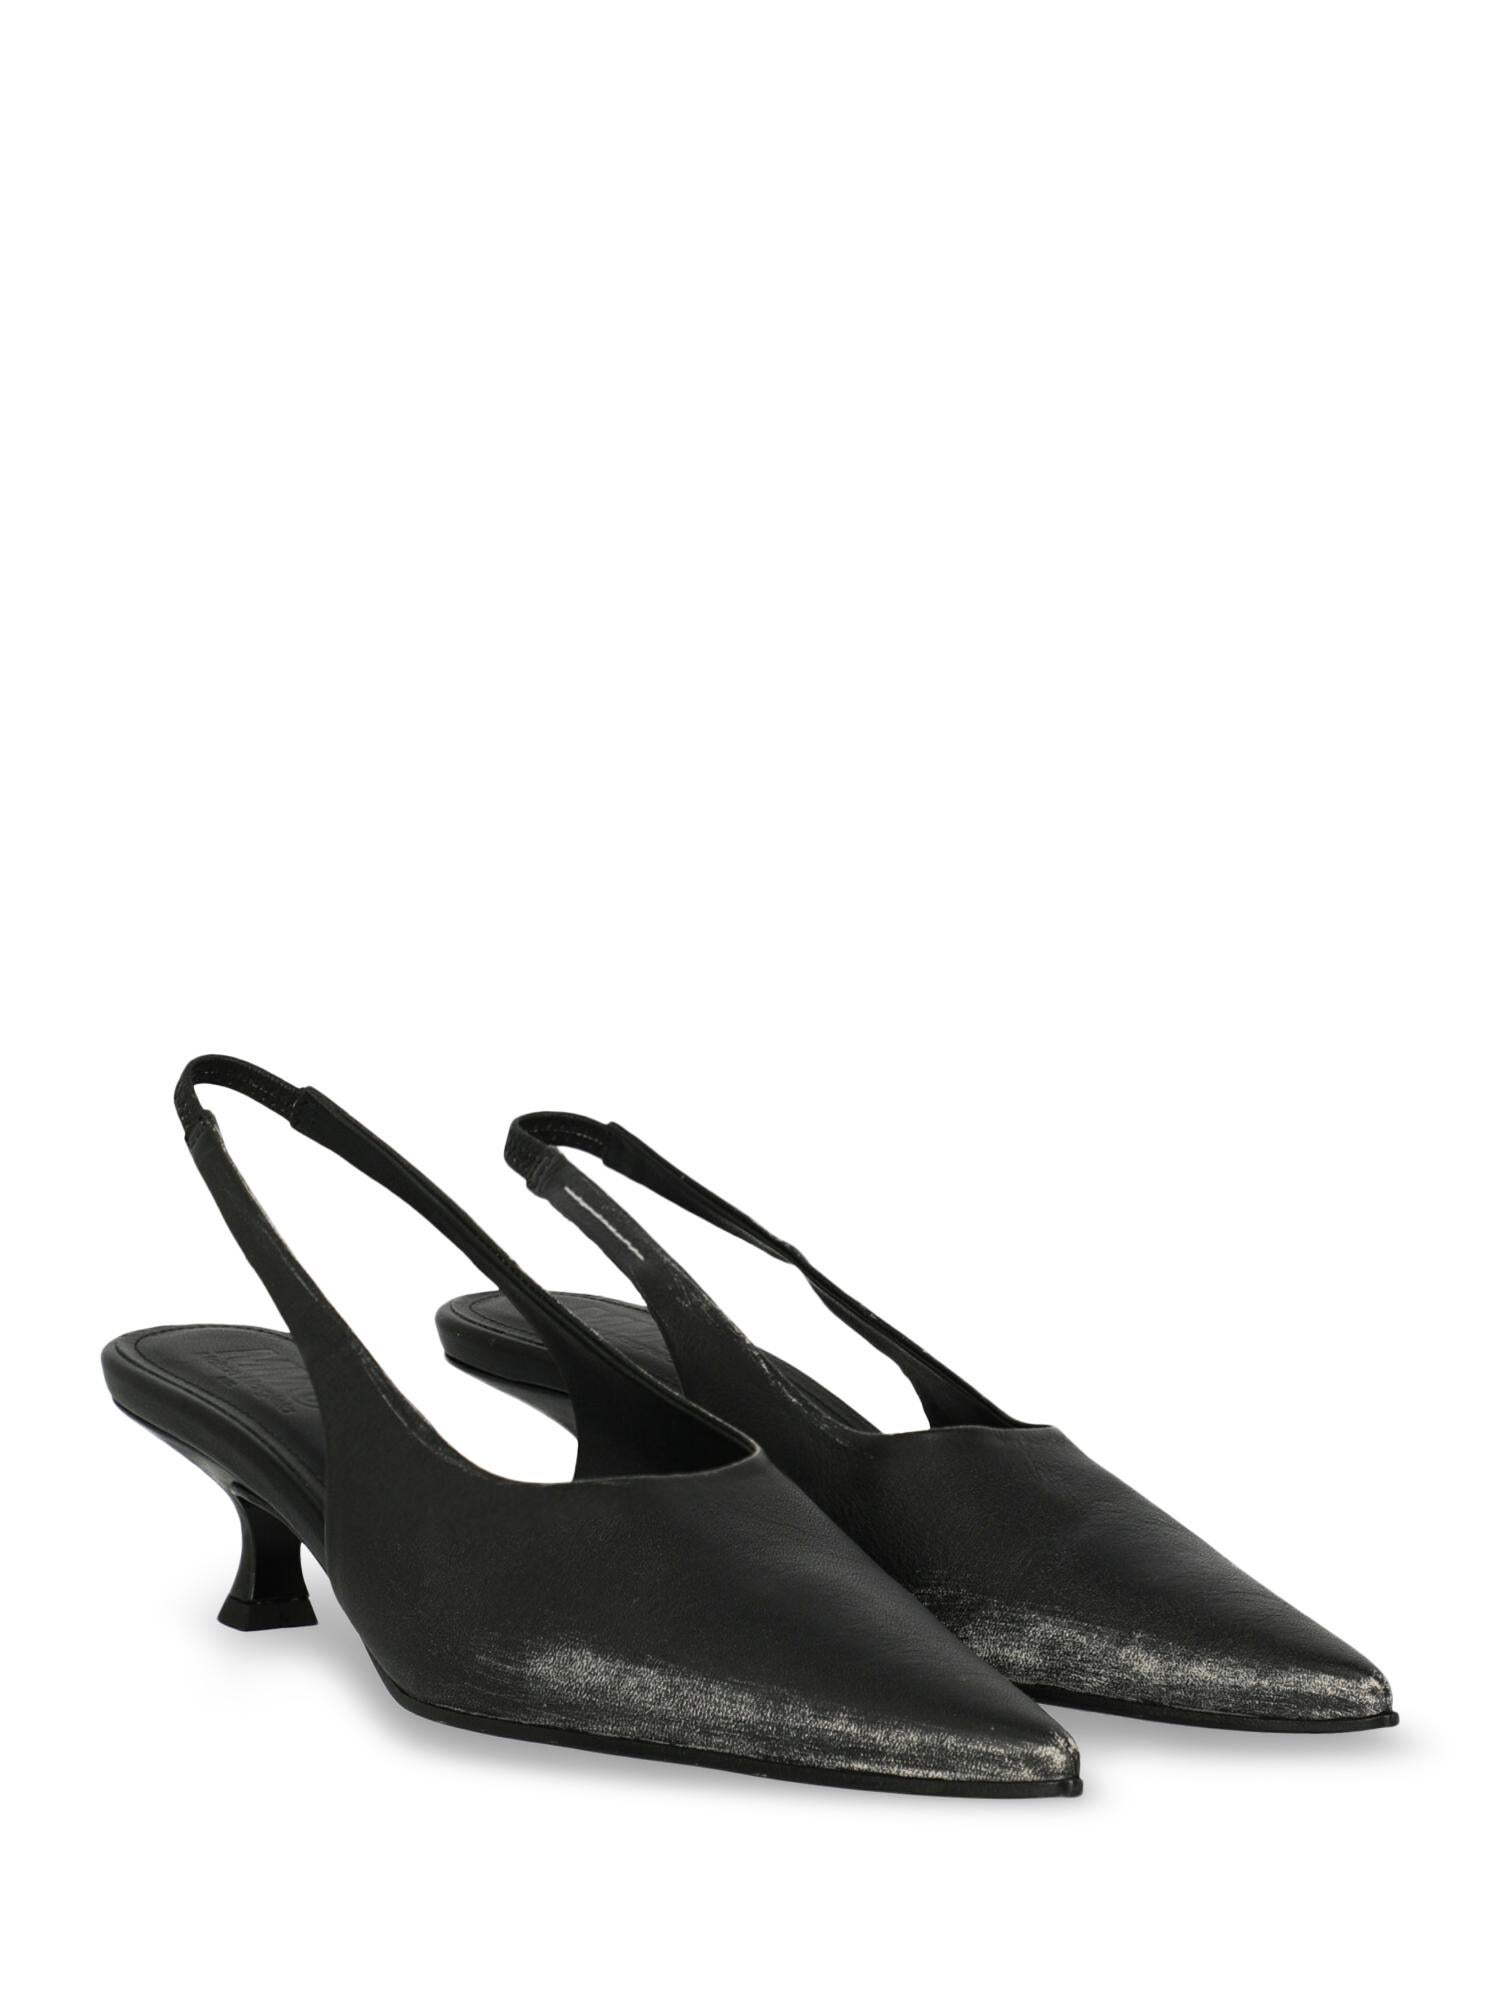 Mules, leather, solid color, aged finishing, backless design, elasticated slingback fastening, pointed toe, branded insole, tapered heel, low and flat heel. Product Condition: Excellent. Sole: negligible scratches. Upper: negligible deformation
